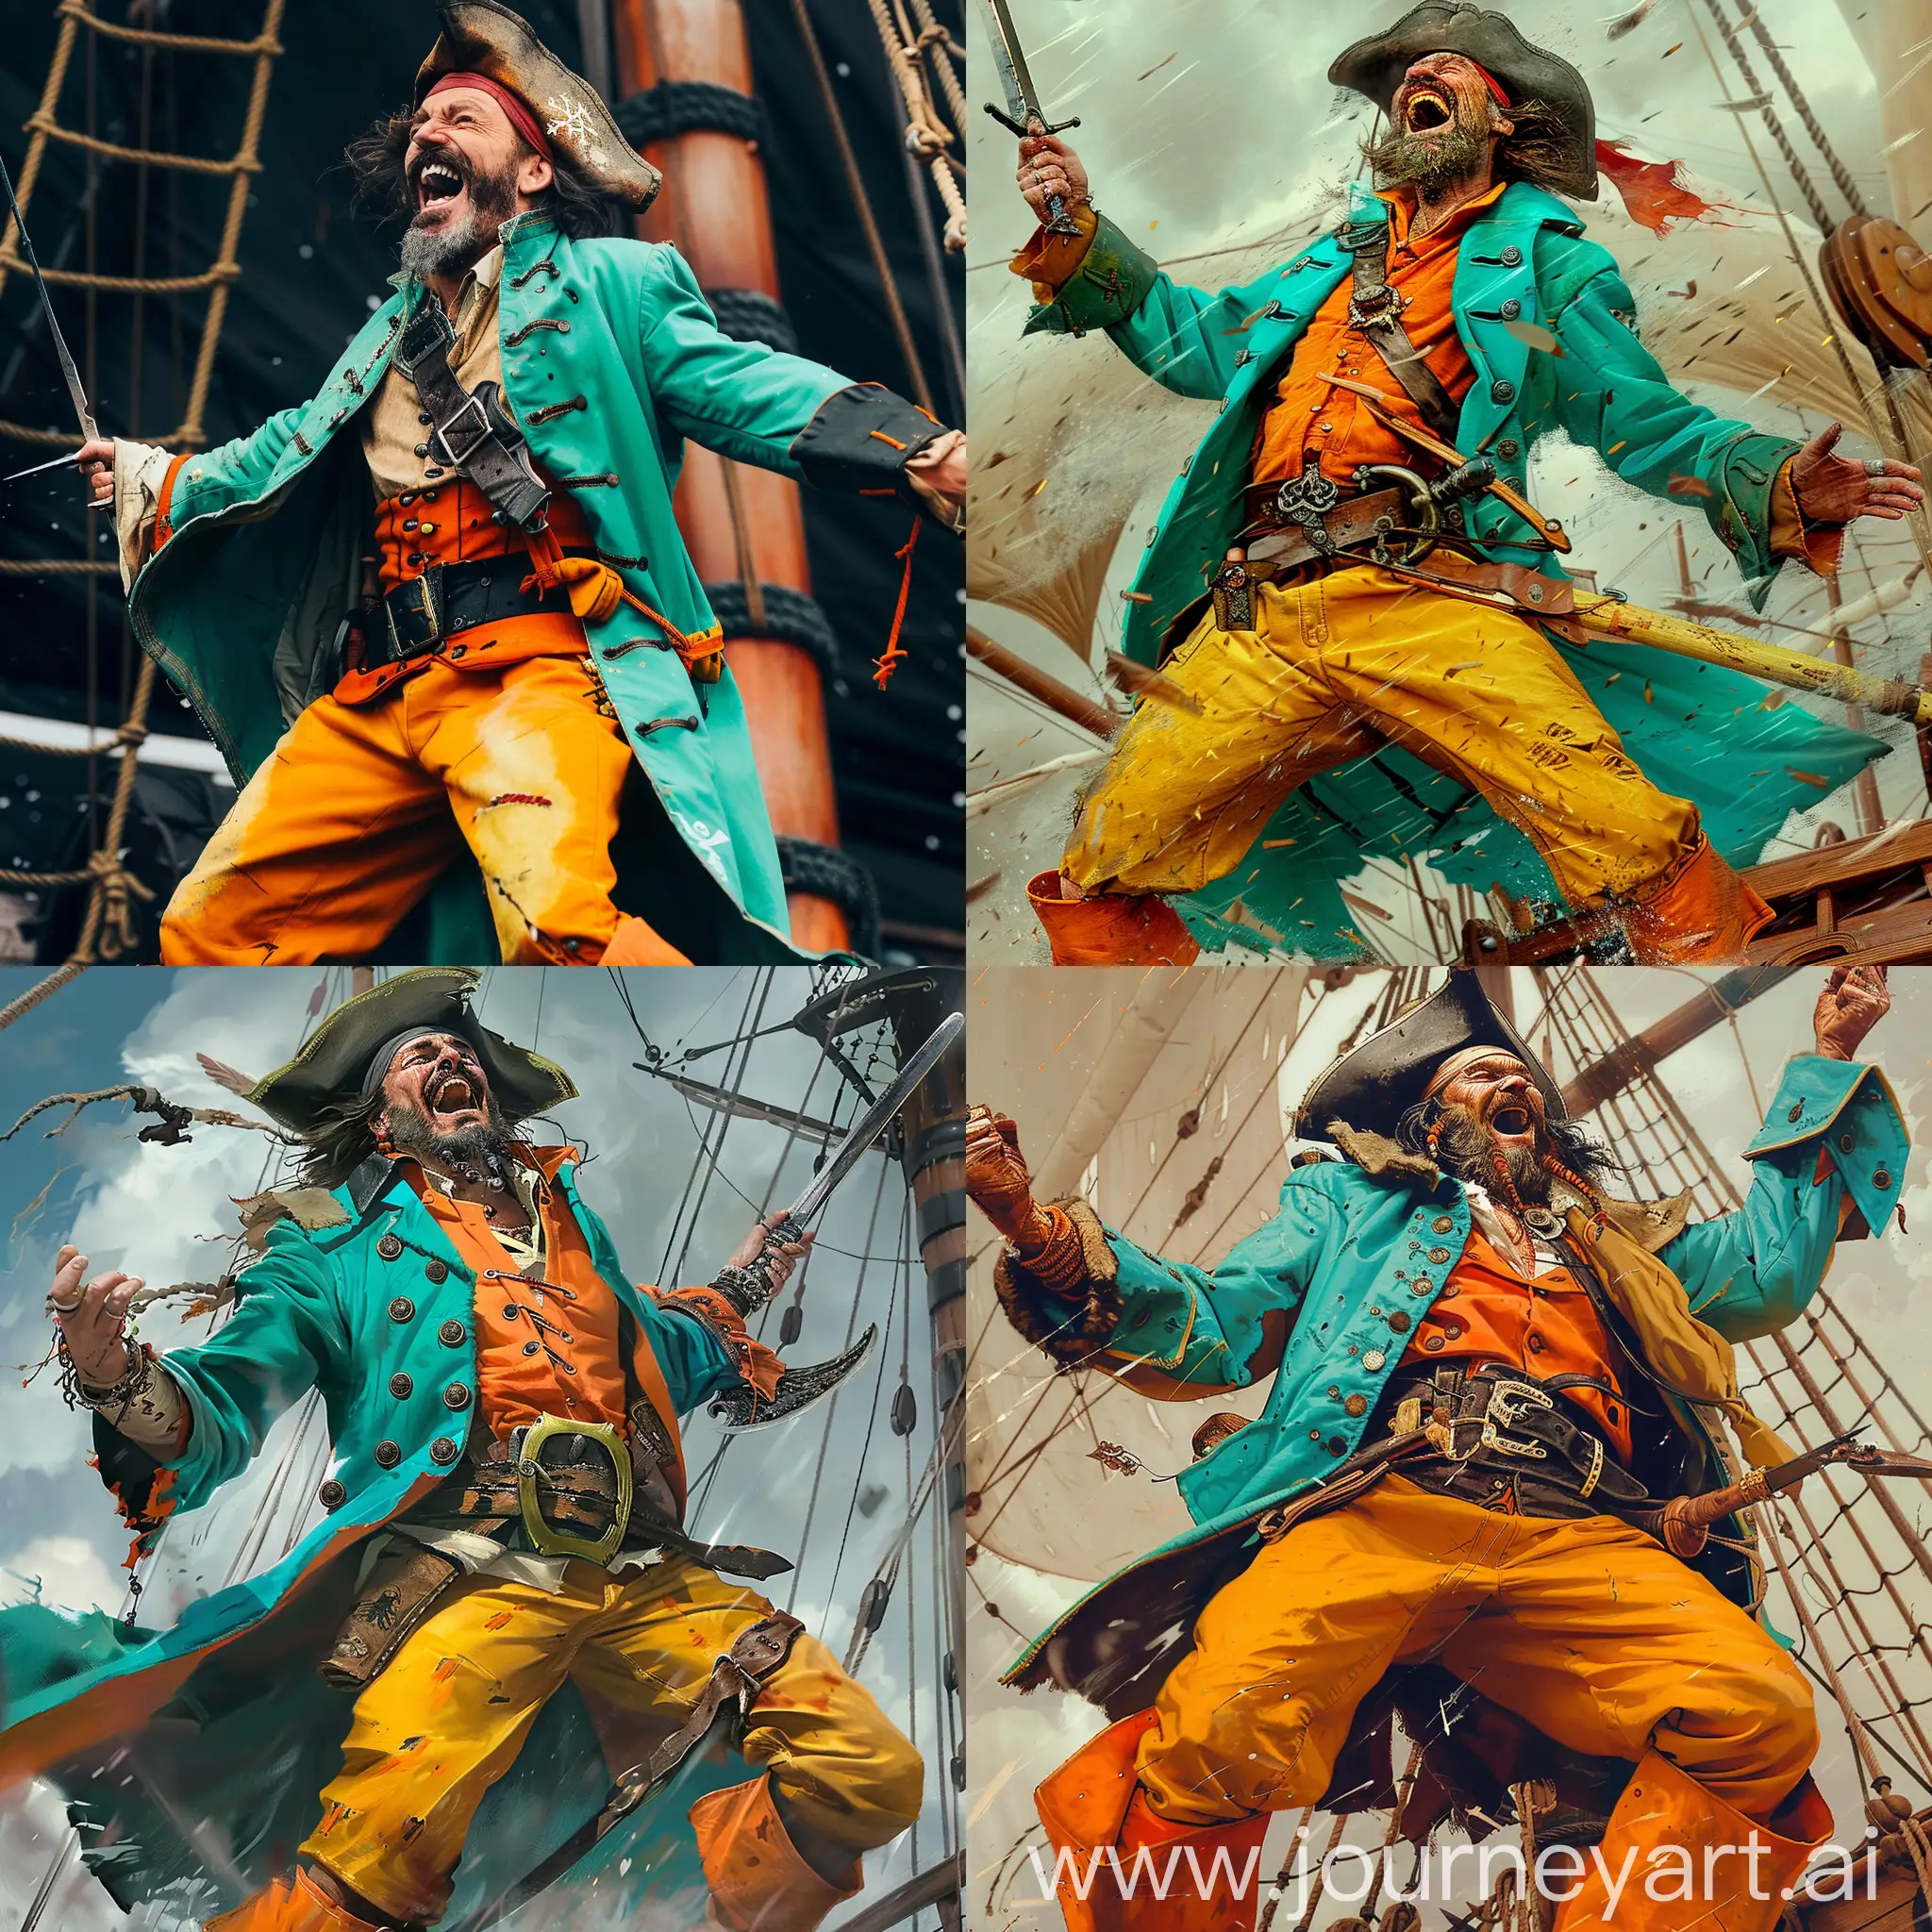 Middleaged-Intelligent-Pirate-in-Turquoise-Coat-Laughing-with-Cossack-Saber